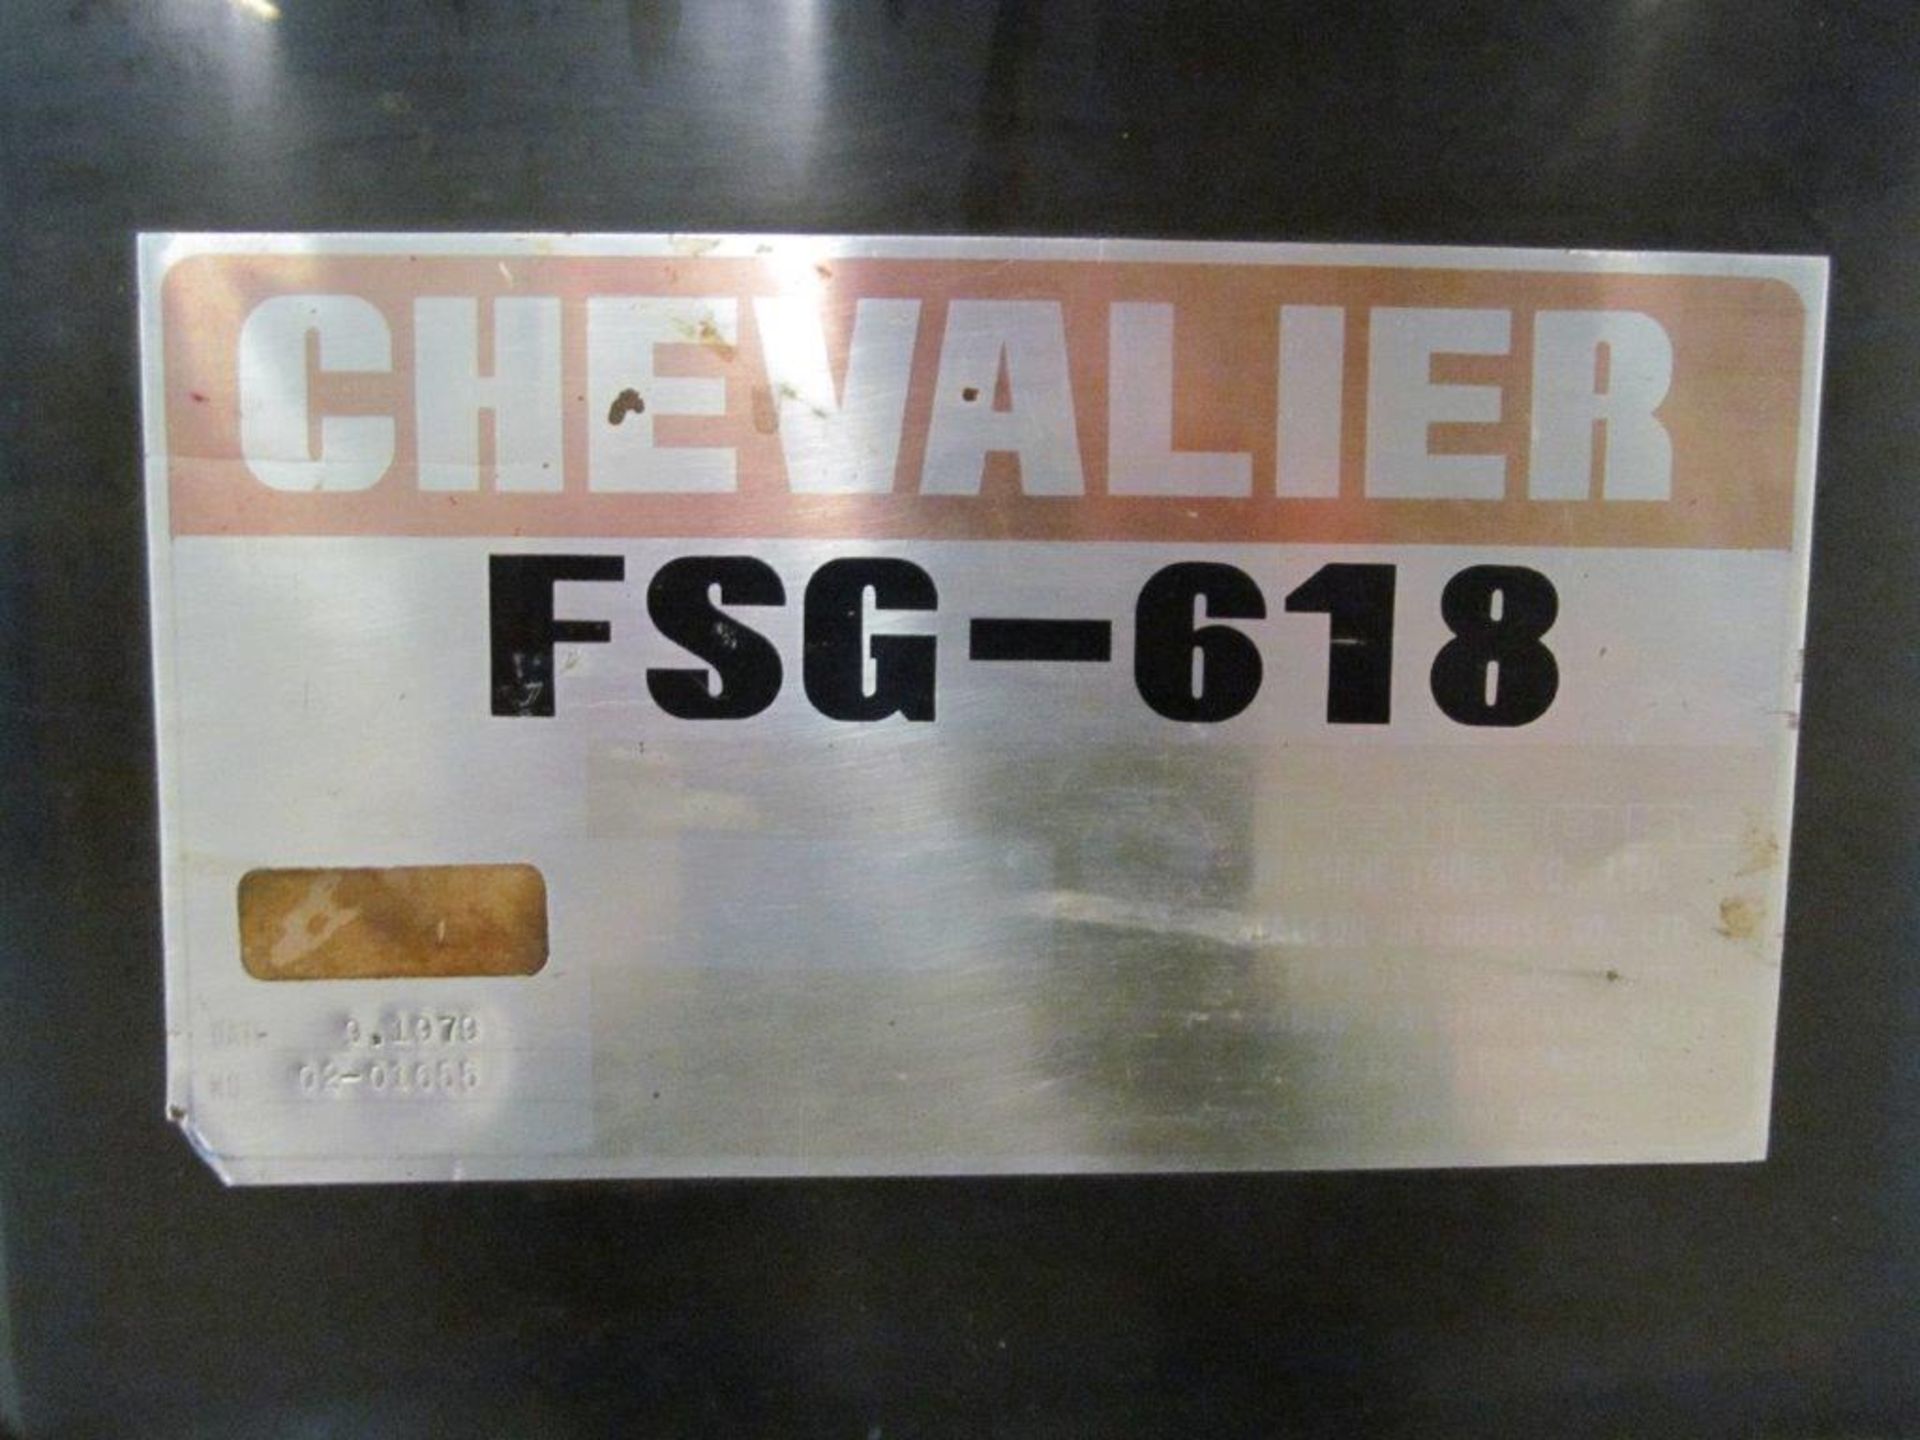 CHEVALIER FSG-618 SURFACE GRINDER, 6" X 18", ELECTRICS: 550V/3PH/60C, "CONDITION UNKNOWN" - Image 3 of 4